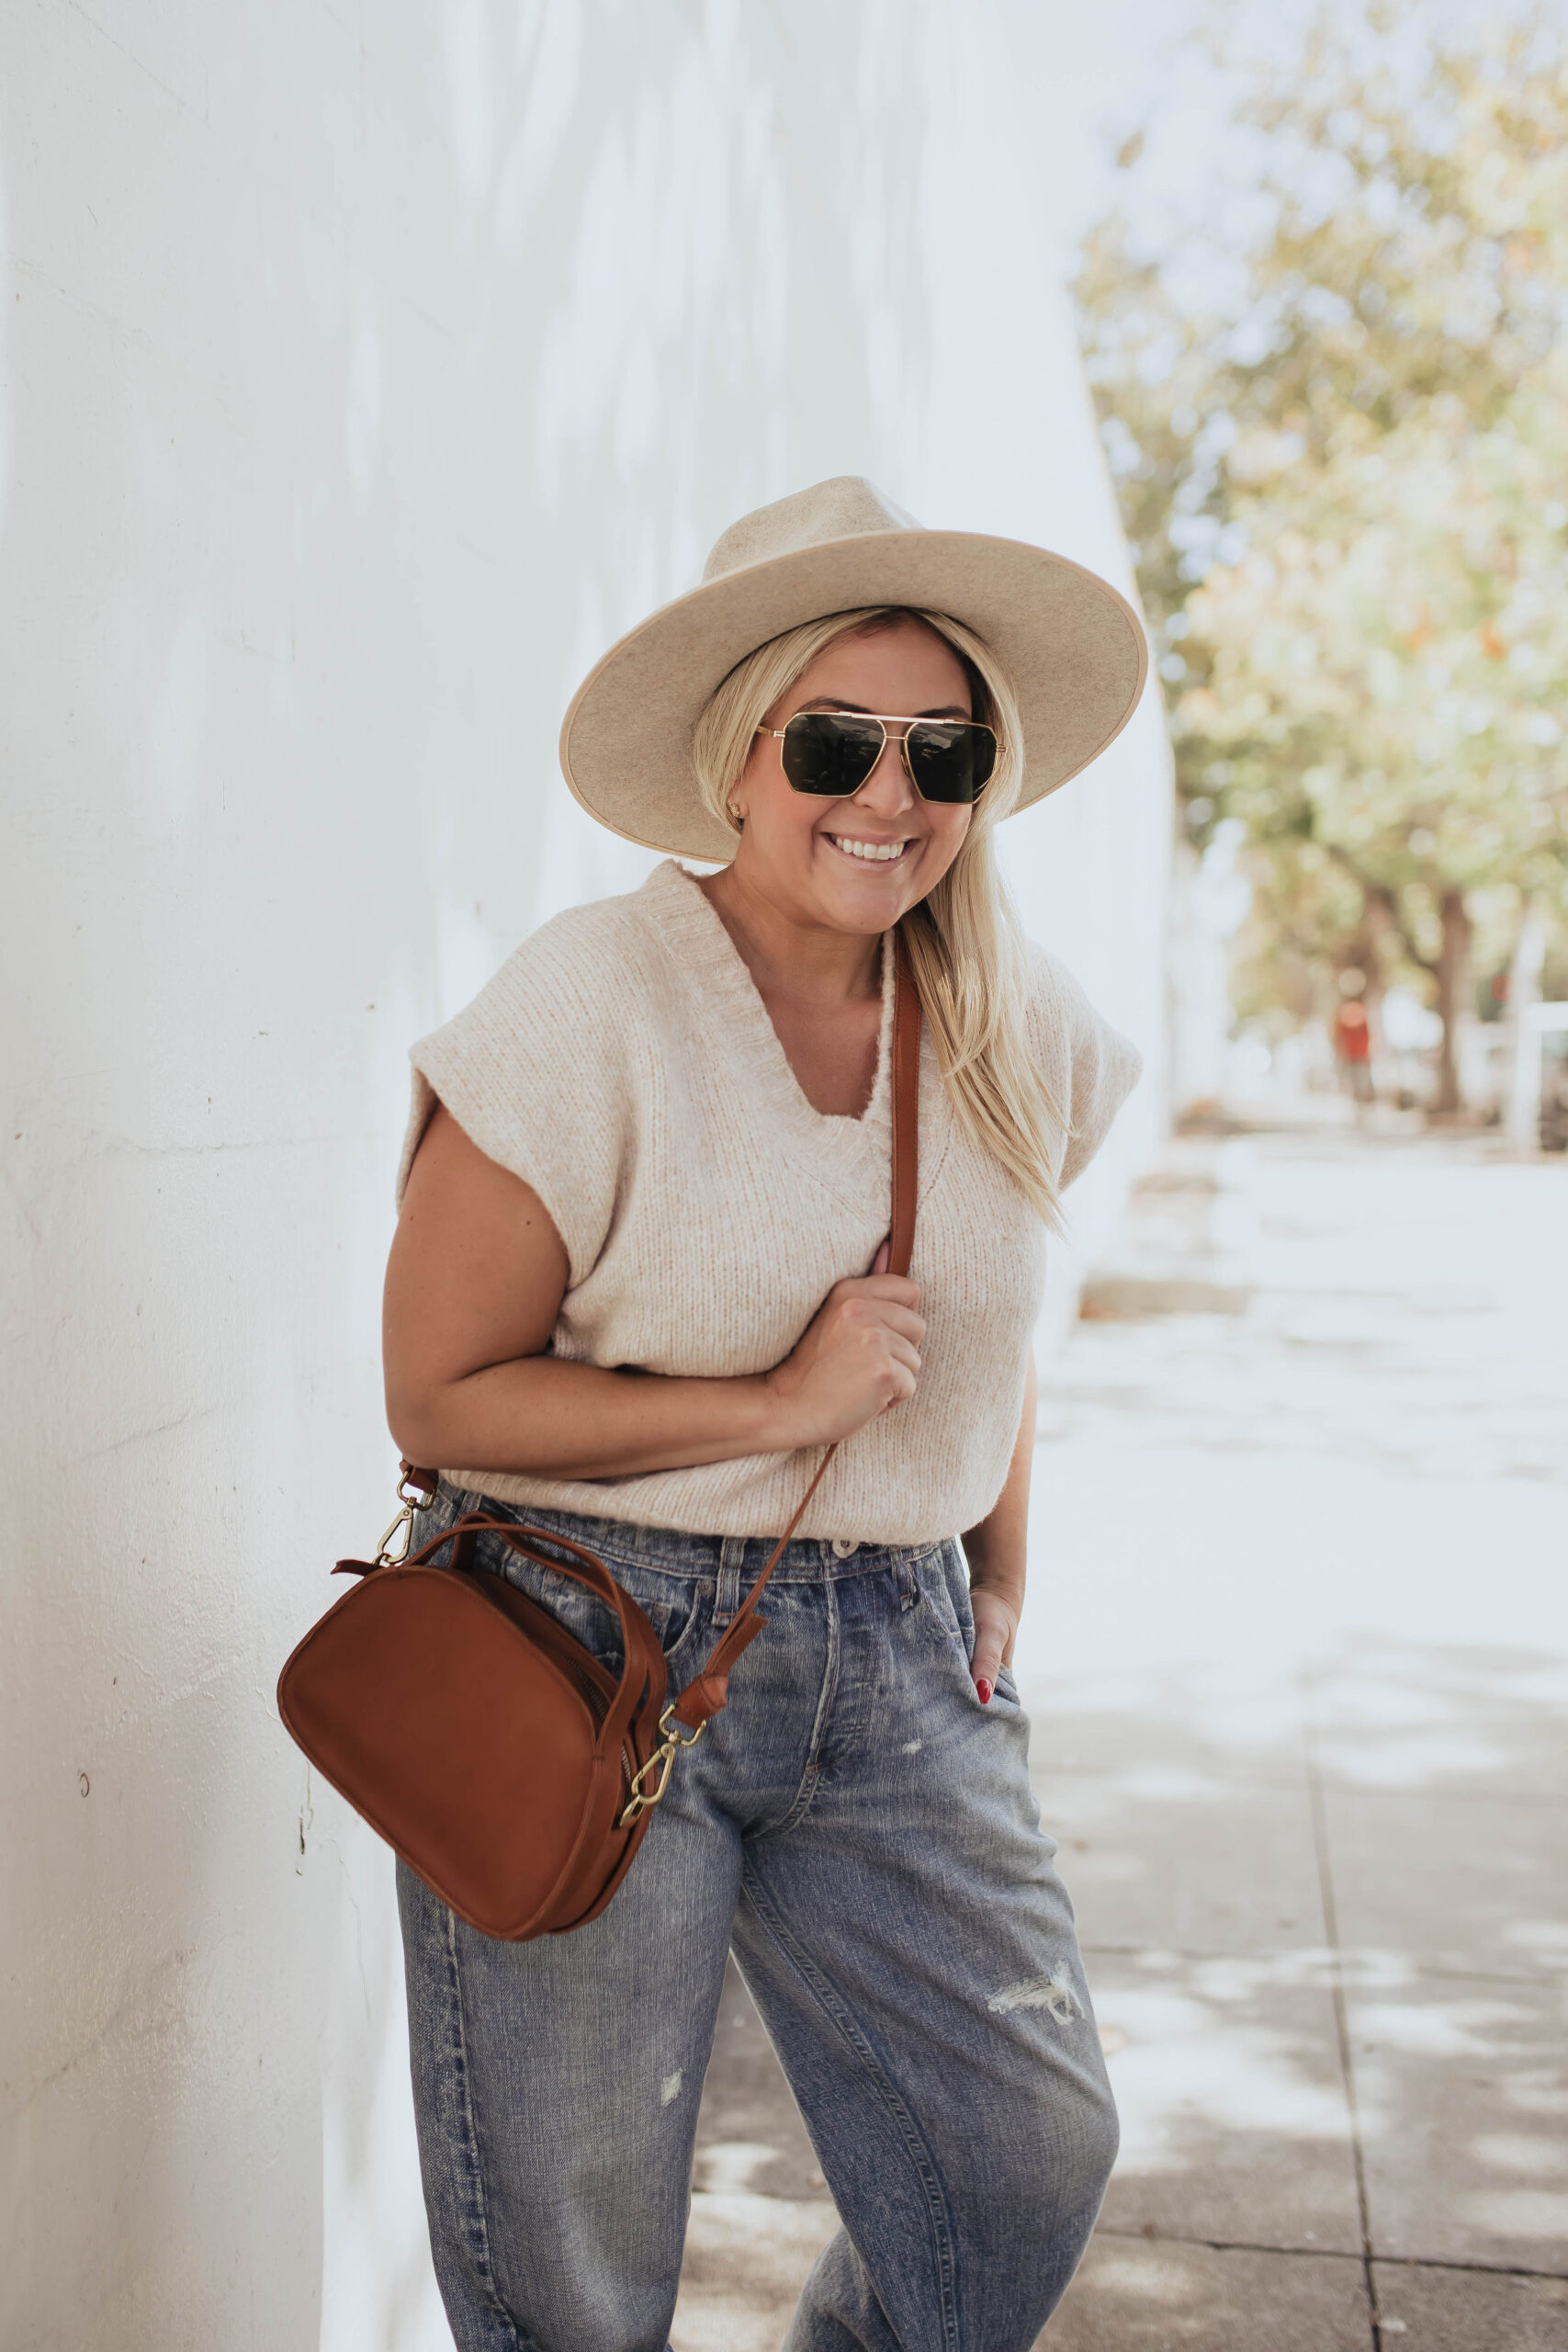 The Fall Madewell Edit, San Francisco blogger KatWalkSF wears the Madewell cropped sweater vest and The Sydney Zip-Top Crossbody Bag